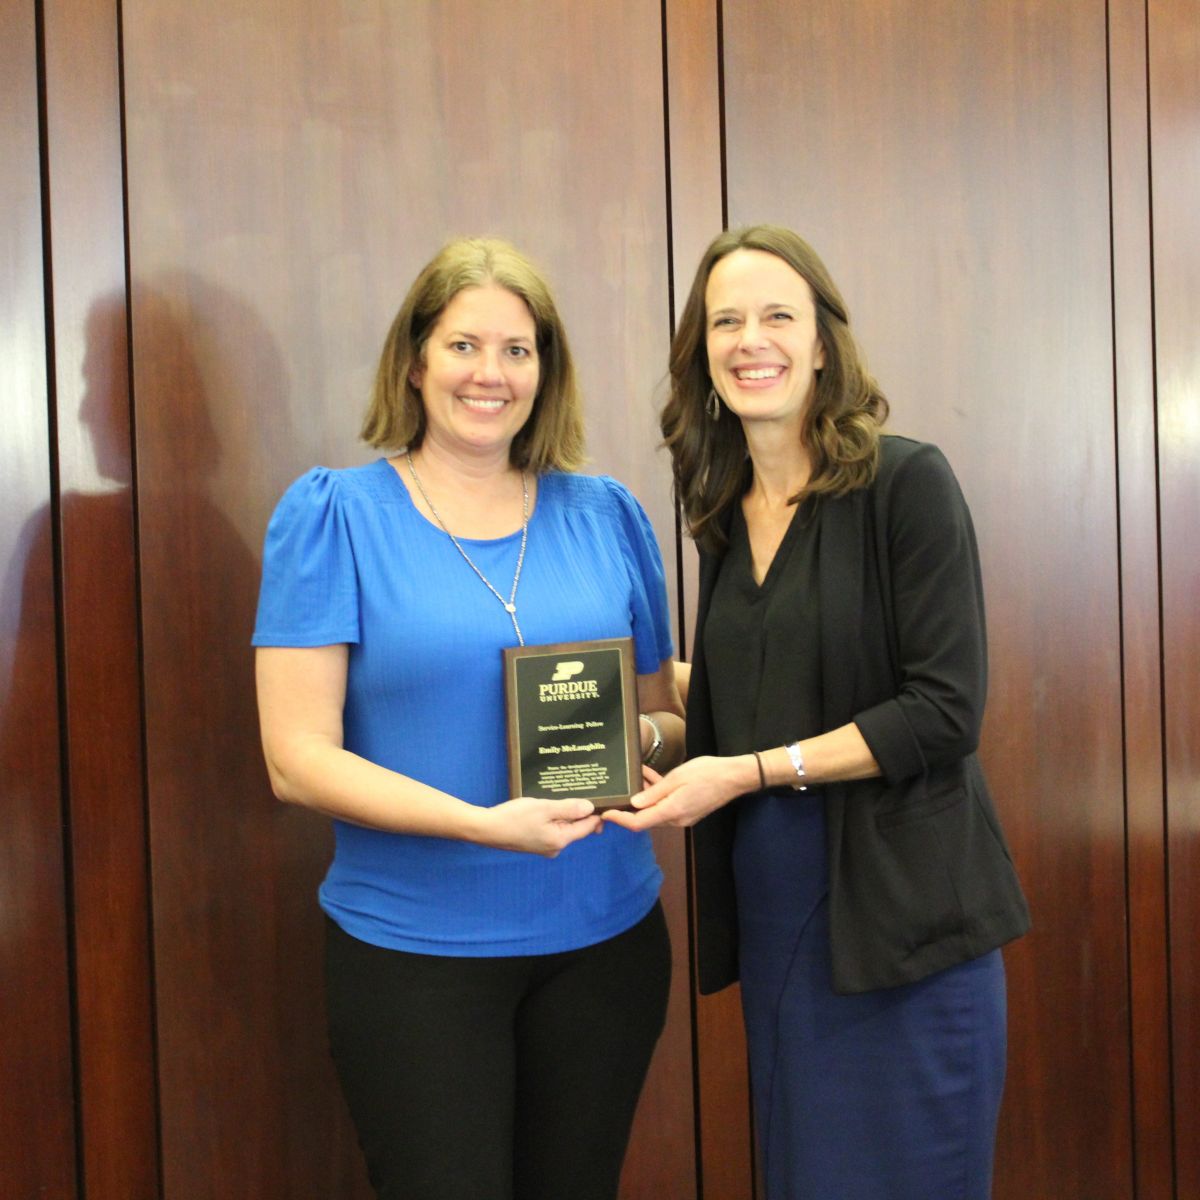 McLaughlin receives the Purdue Service-Learning award. (Photo provided)